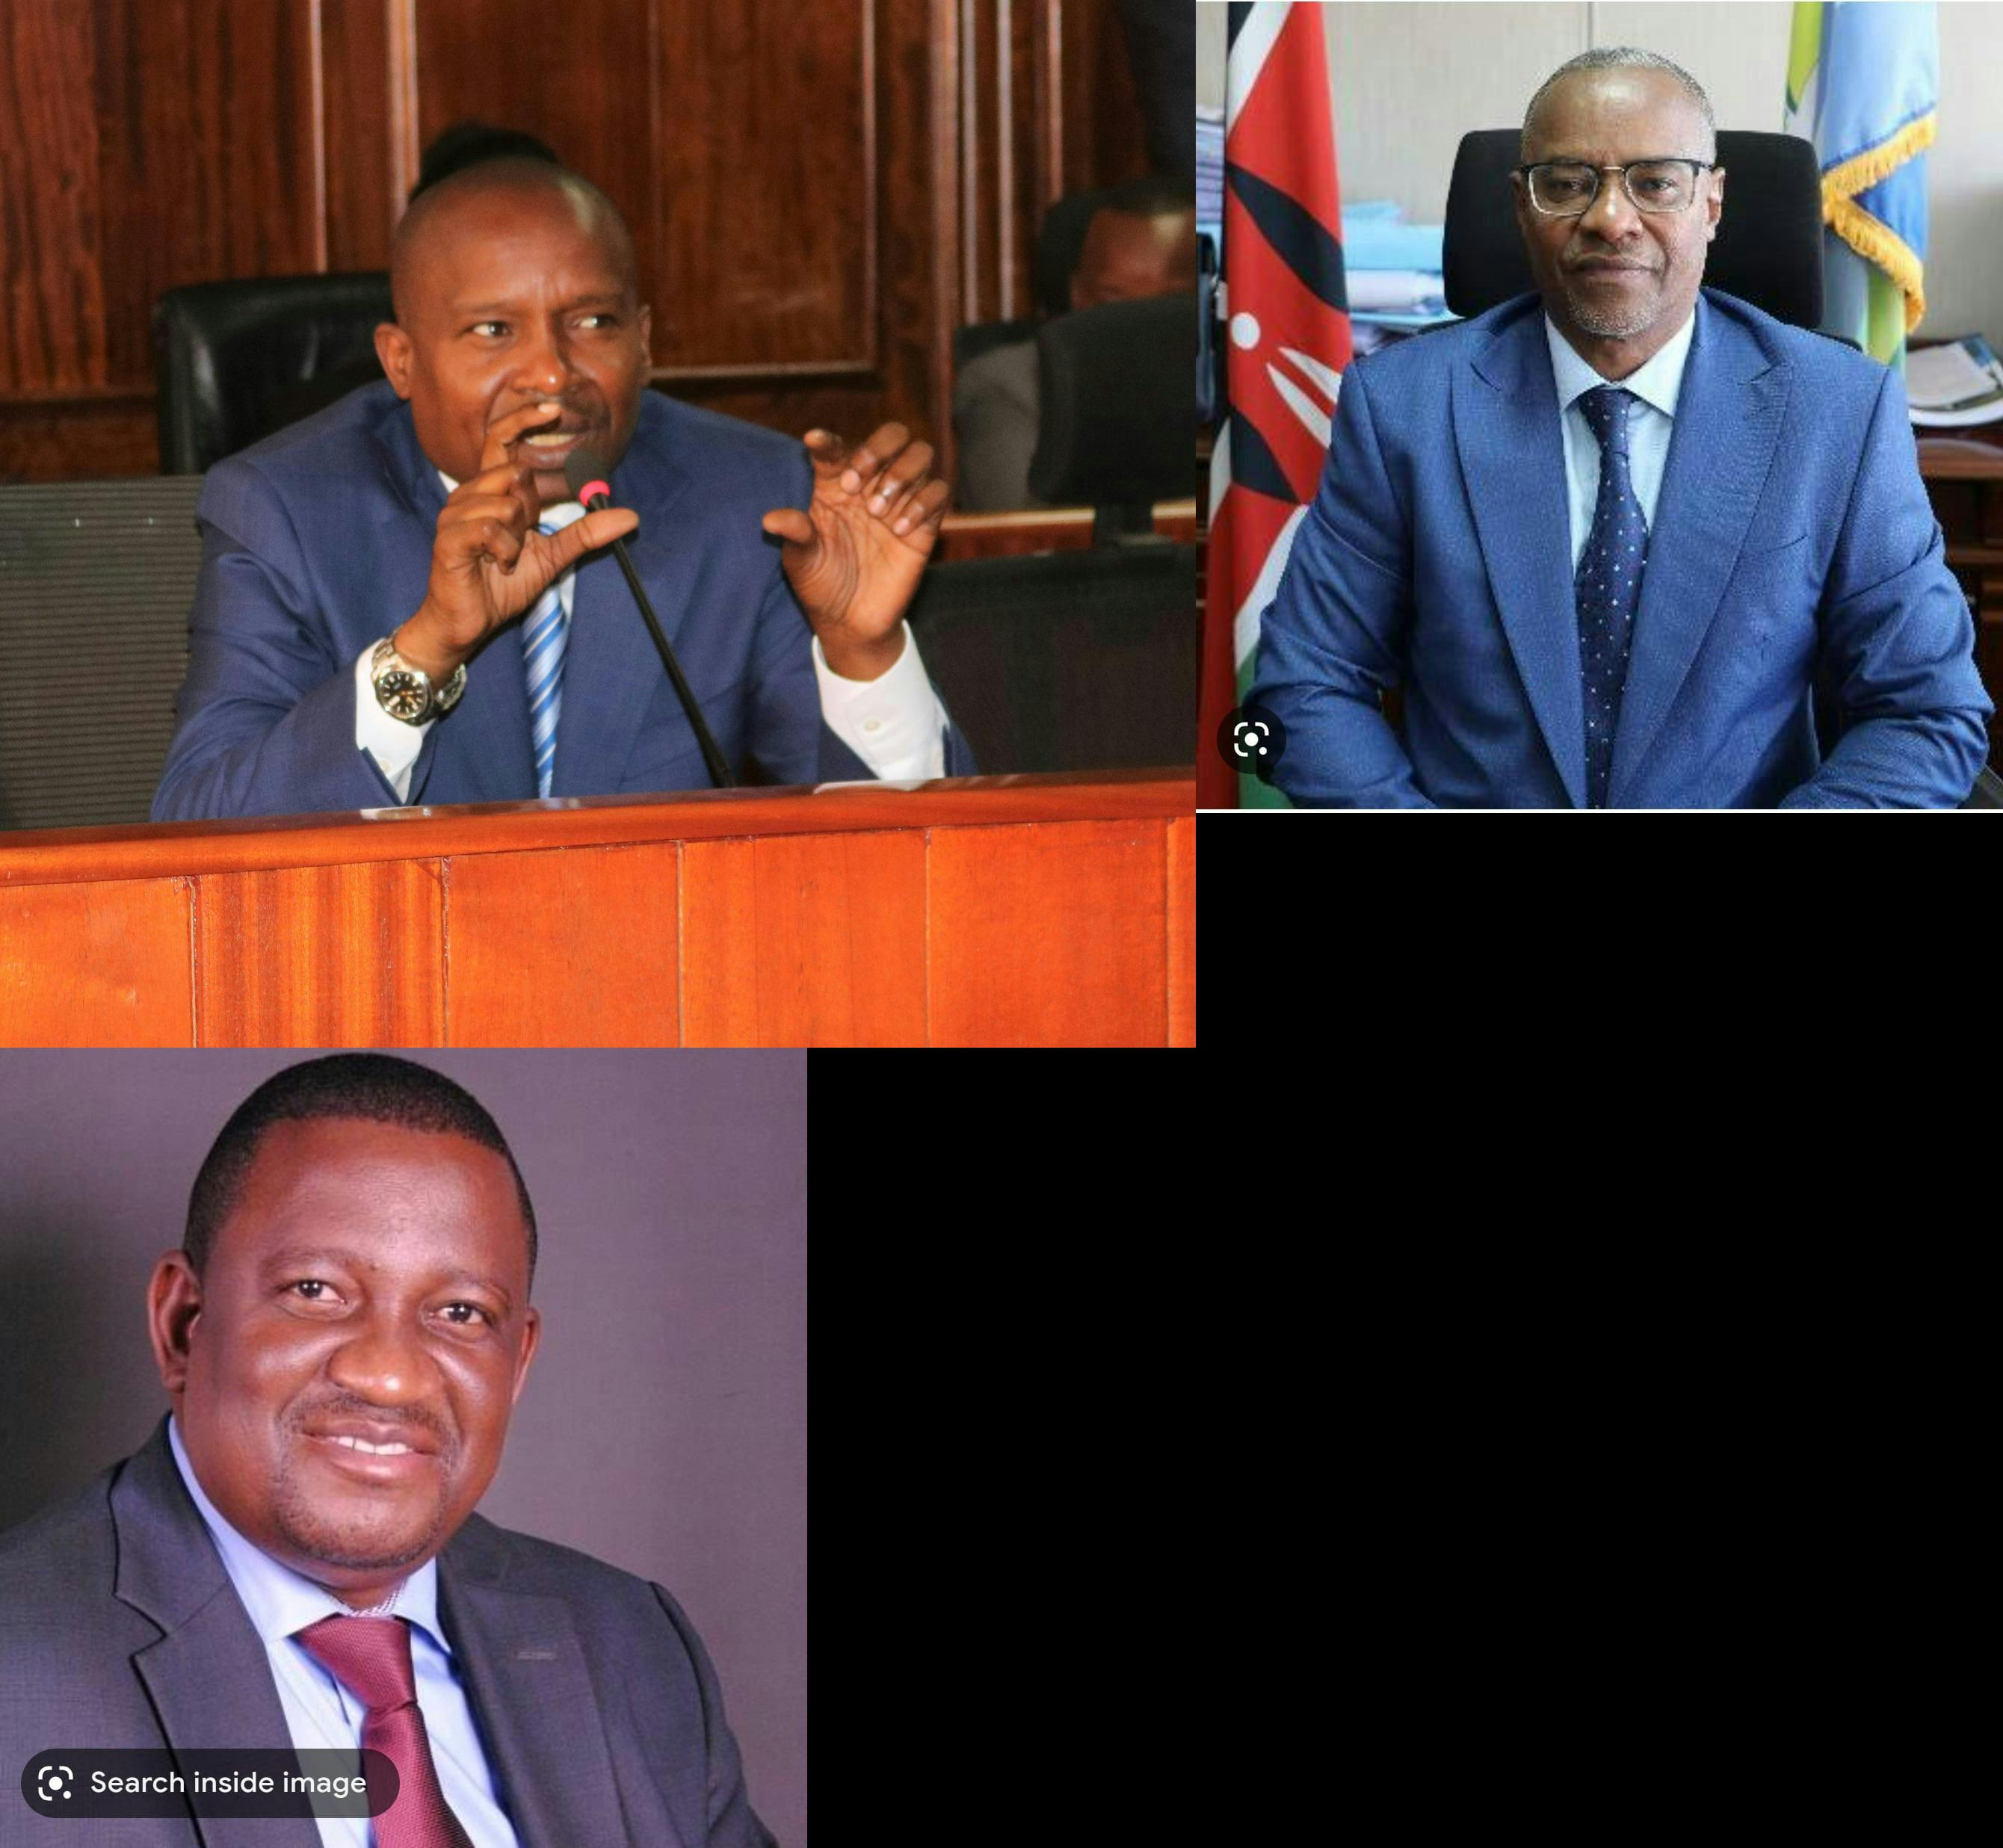 THREE CABINET SECRETARIES TO APPEAR IN THE SENATE THIS WEDNESDAY TO ANSWER QUESTIONS FROM SENATORS.